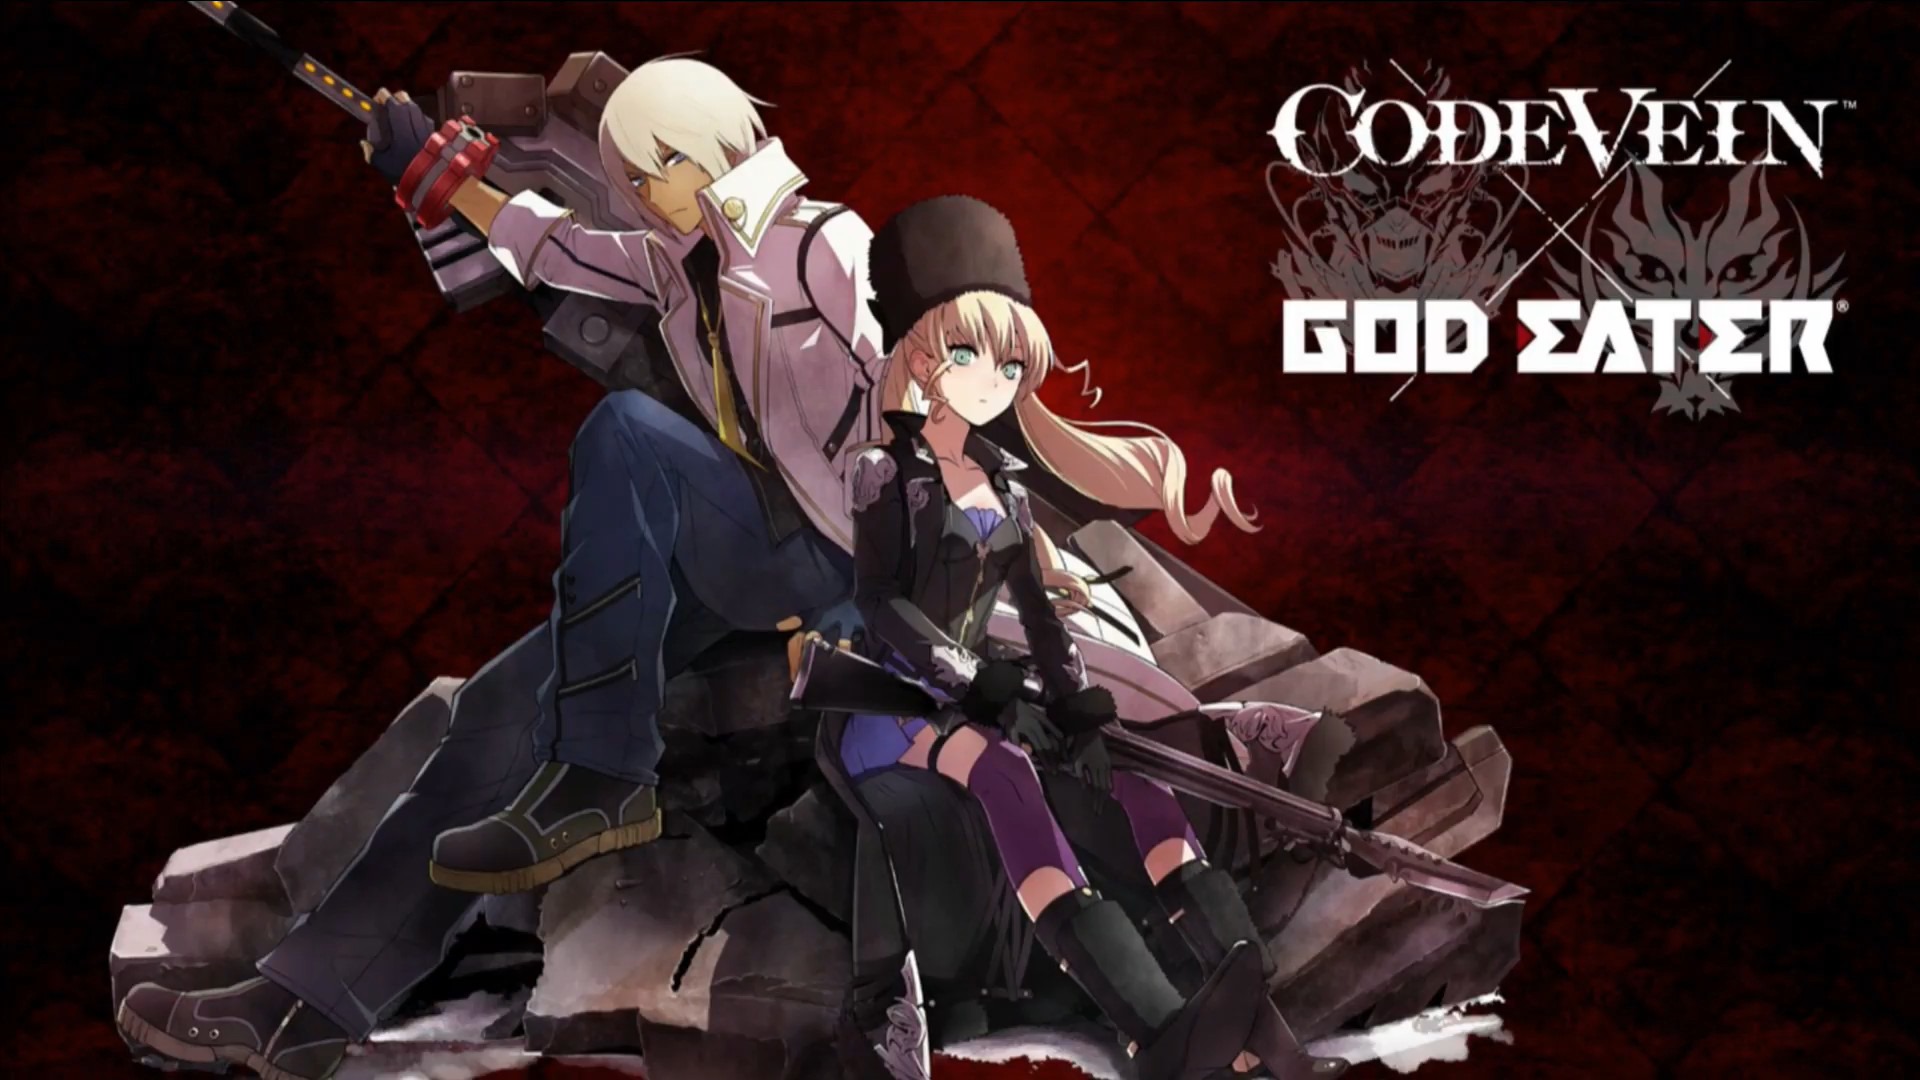 God Eater 3 x Code Vein Collaboration Costumes And Bonuses - Siliconera